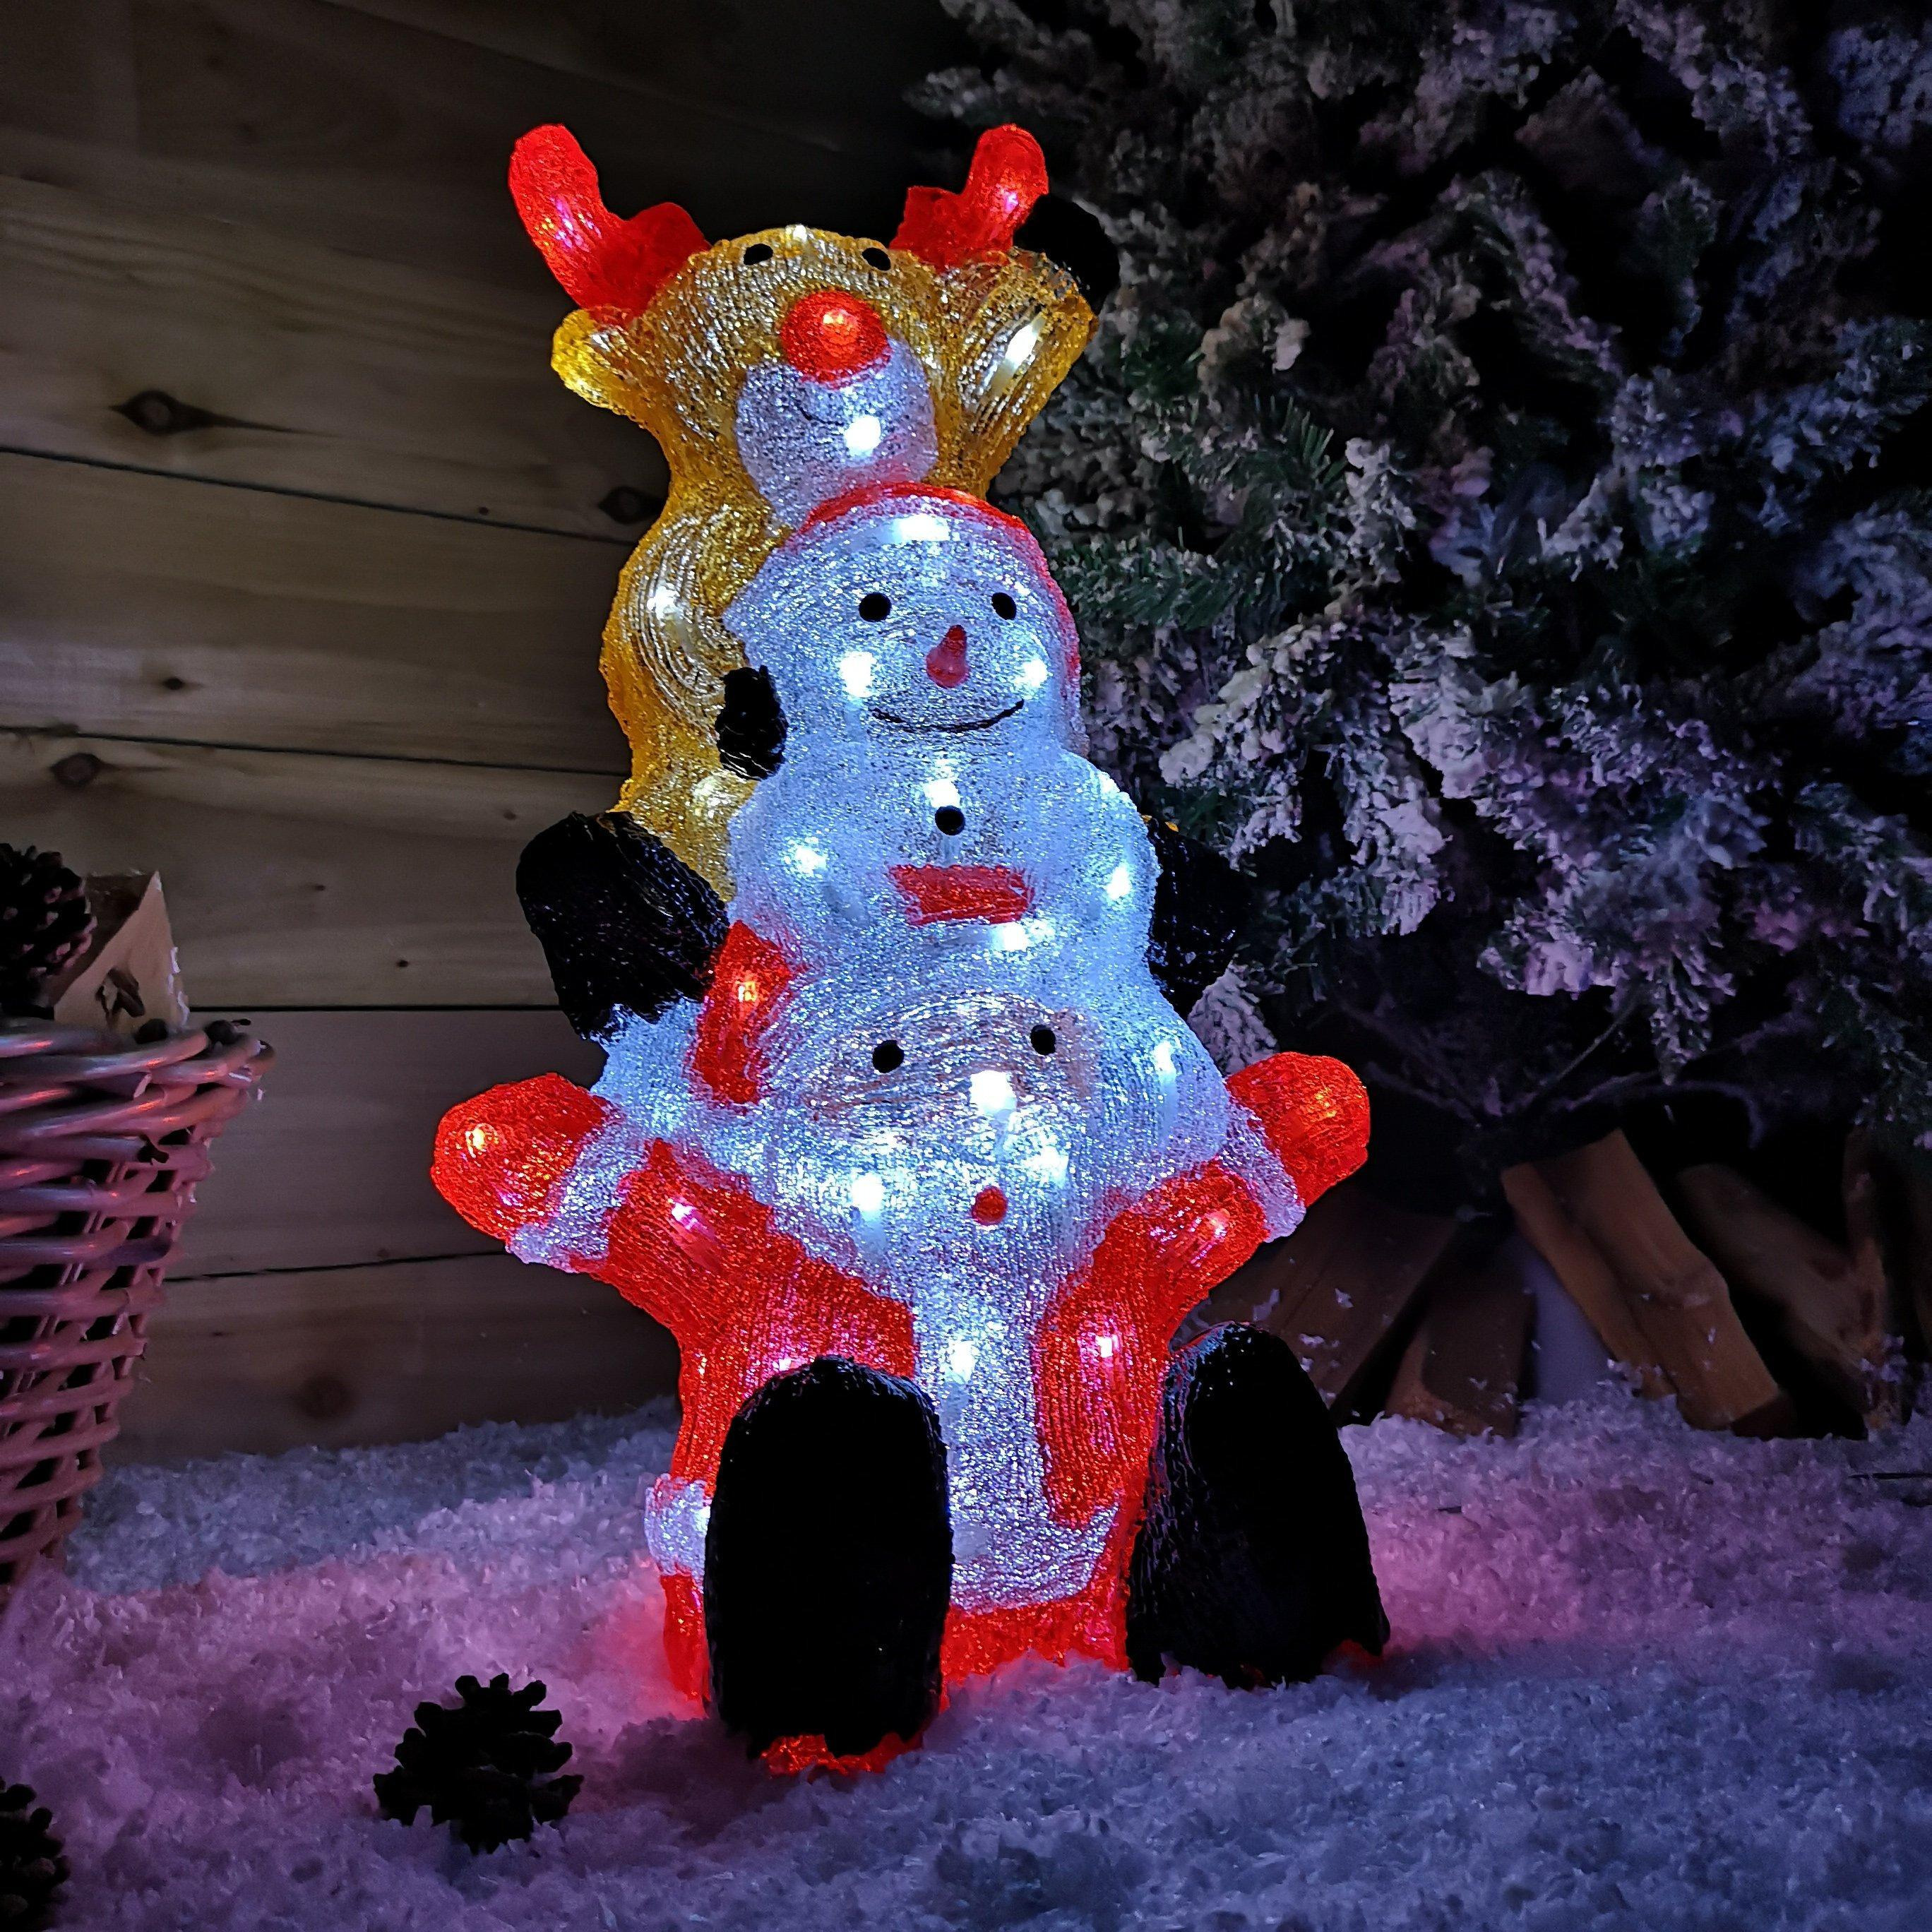 60cm Indoor Outdoor Santa Snowman Reindeer Tower With 60 Ice White LEDs - image 1